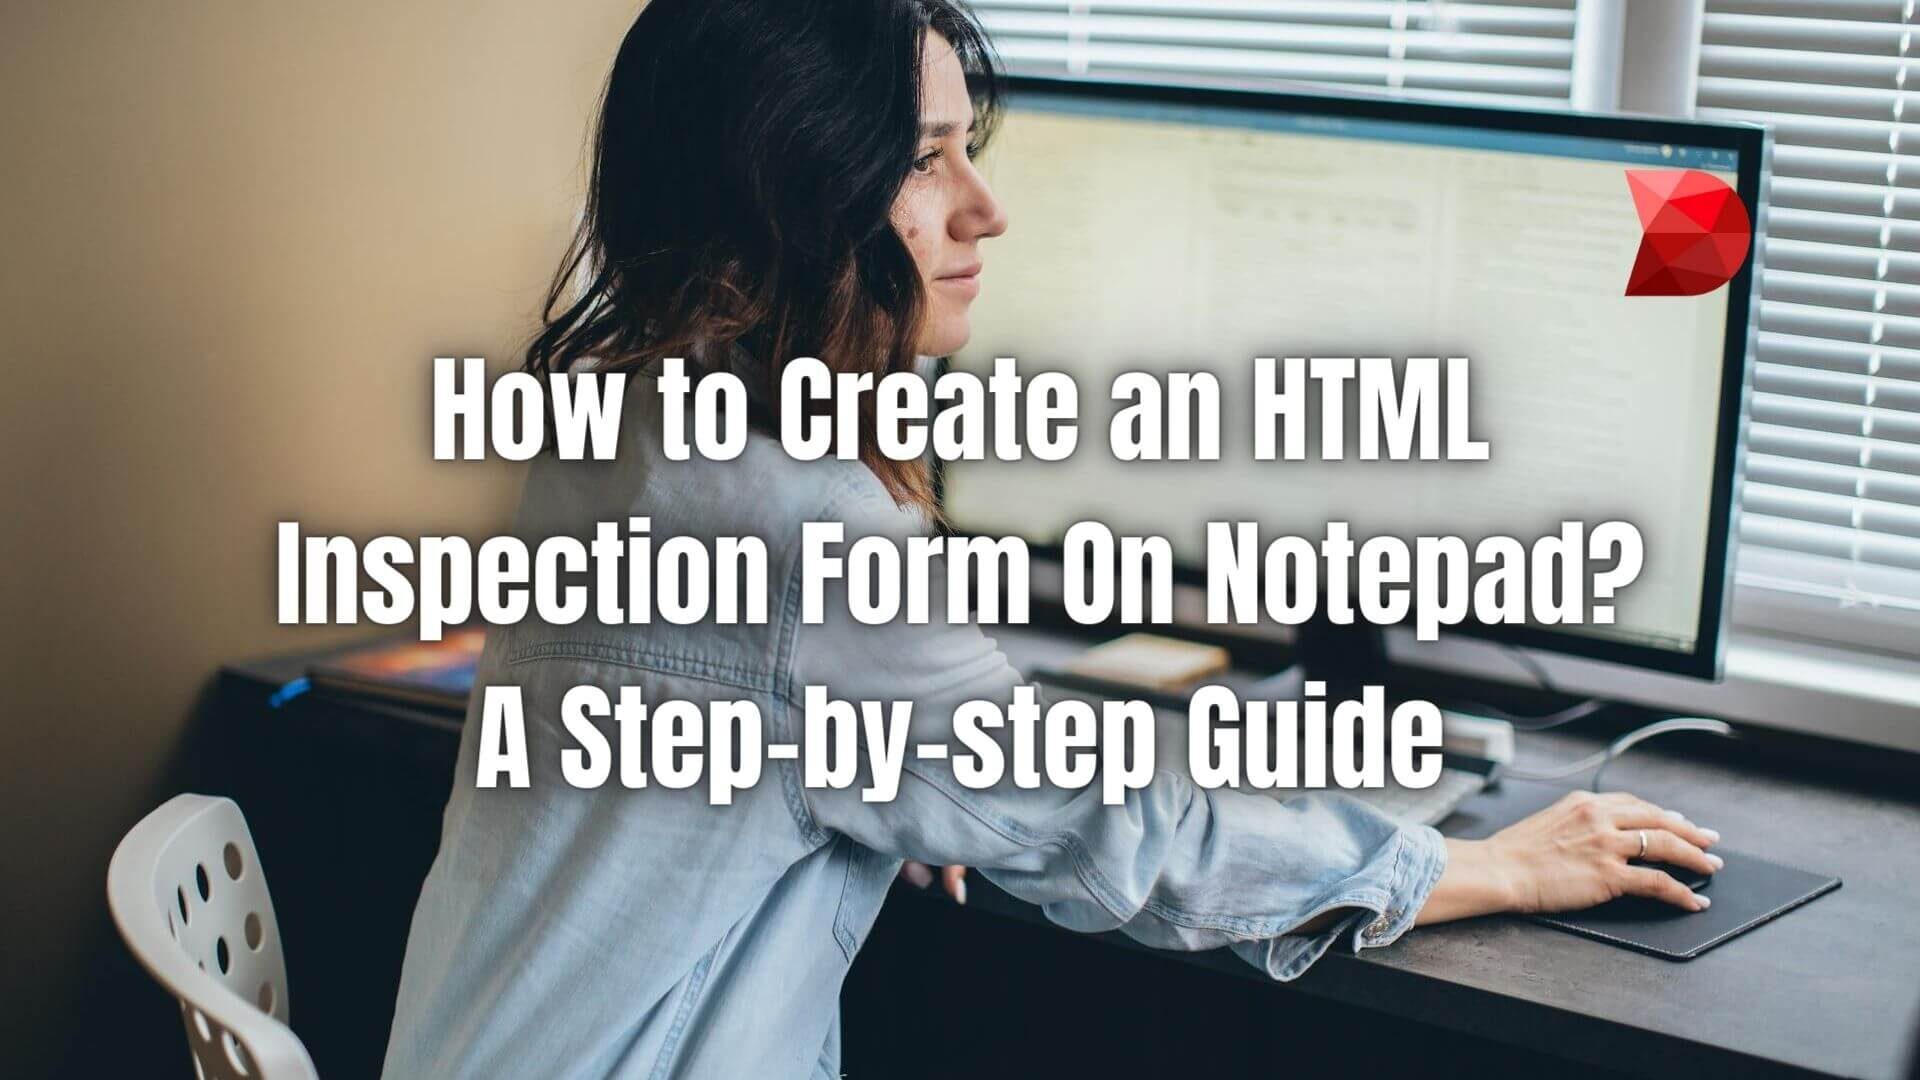 Master creating an HTML inspection form in Notepad with our complete guide. Learn step-by-step techniques for efficient form development.